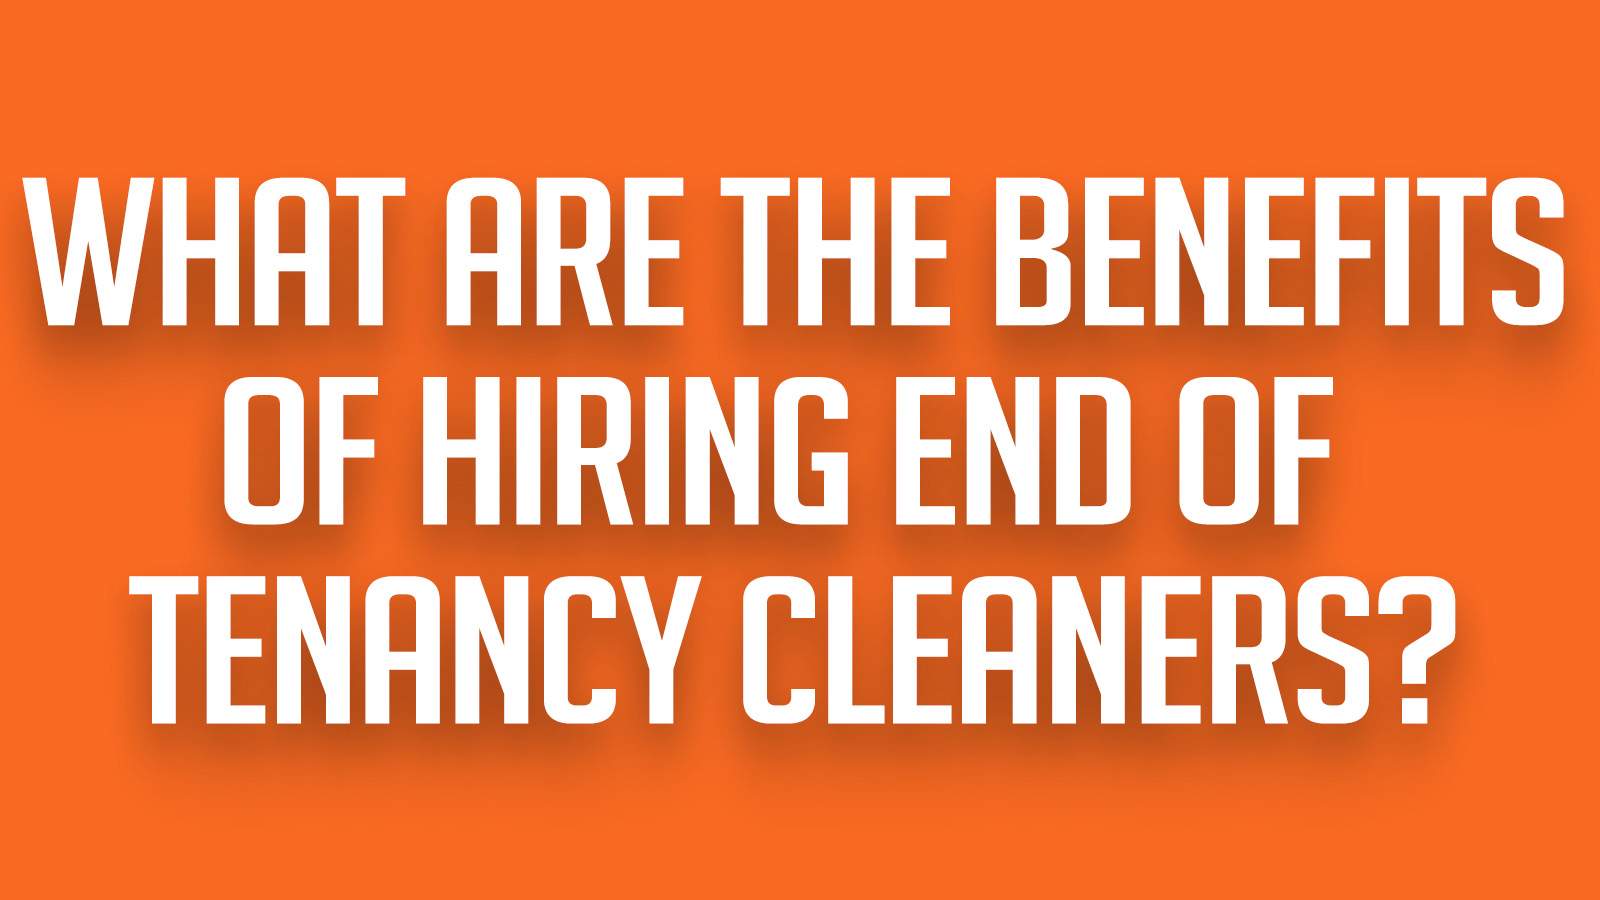 What are the benefits of hiring end of tenancy cleaners?